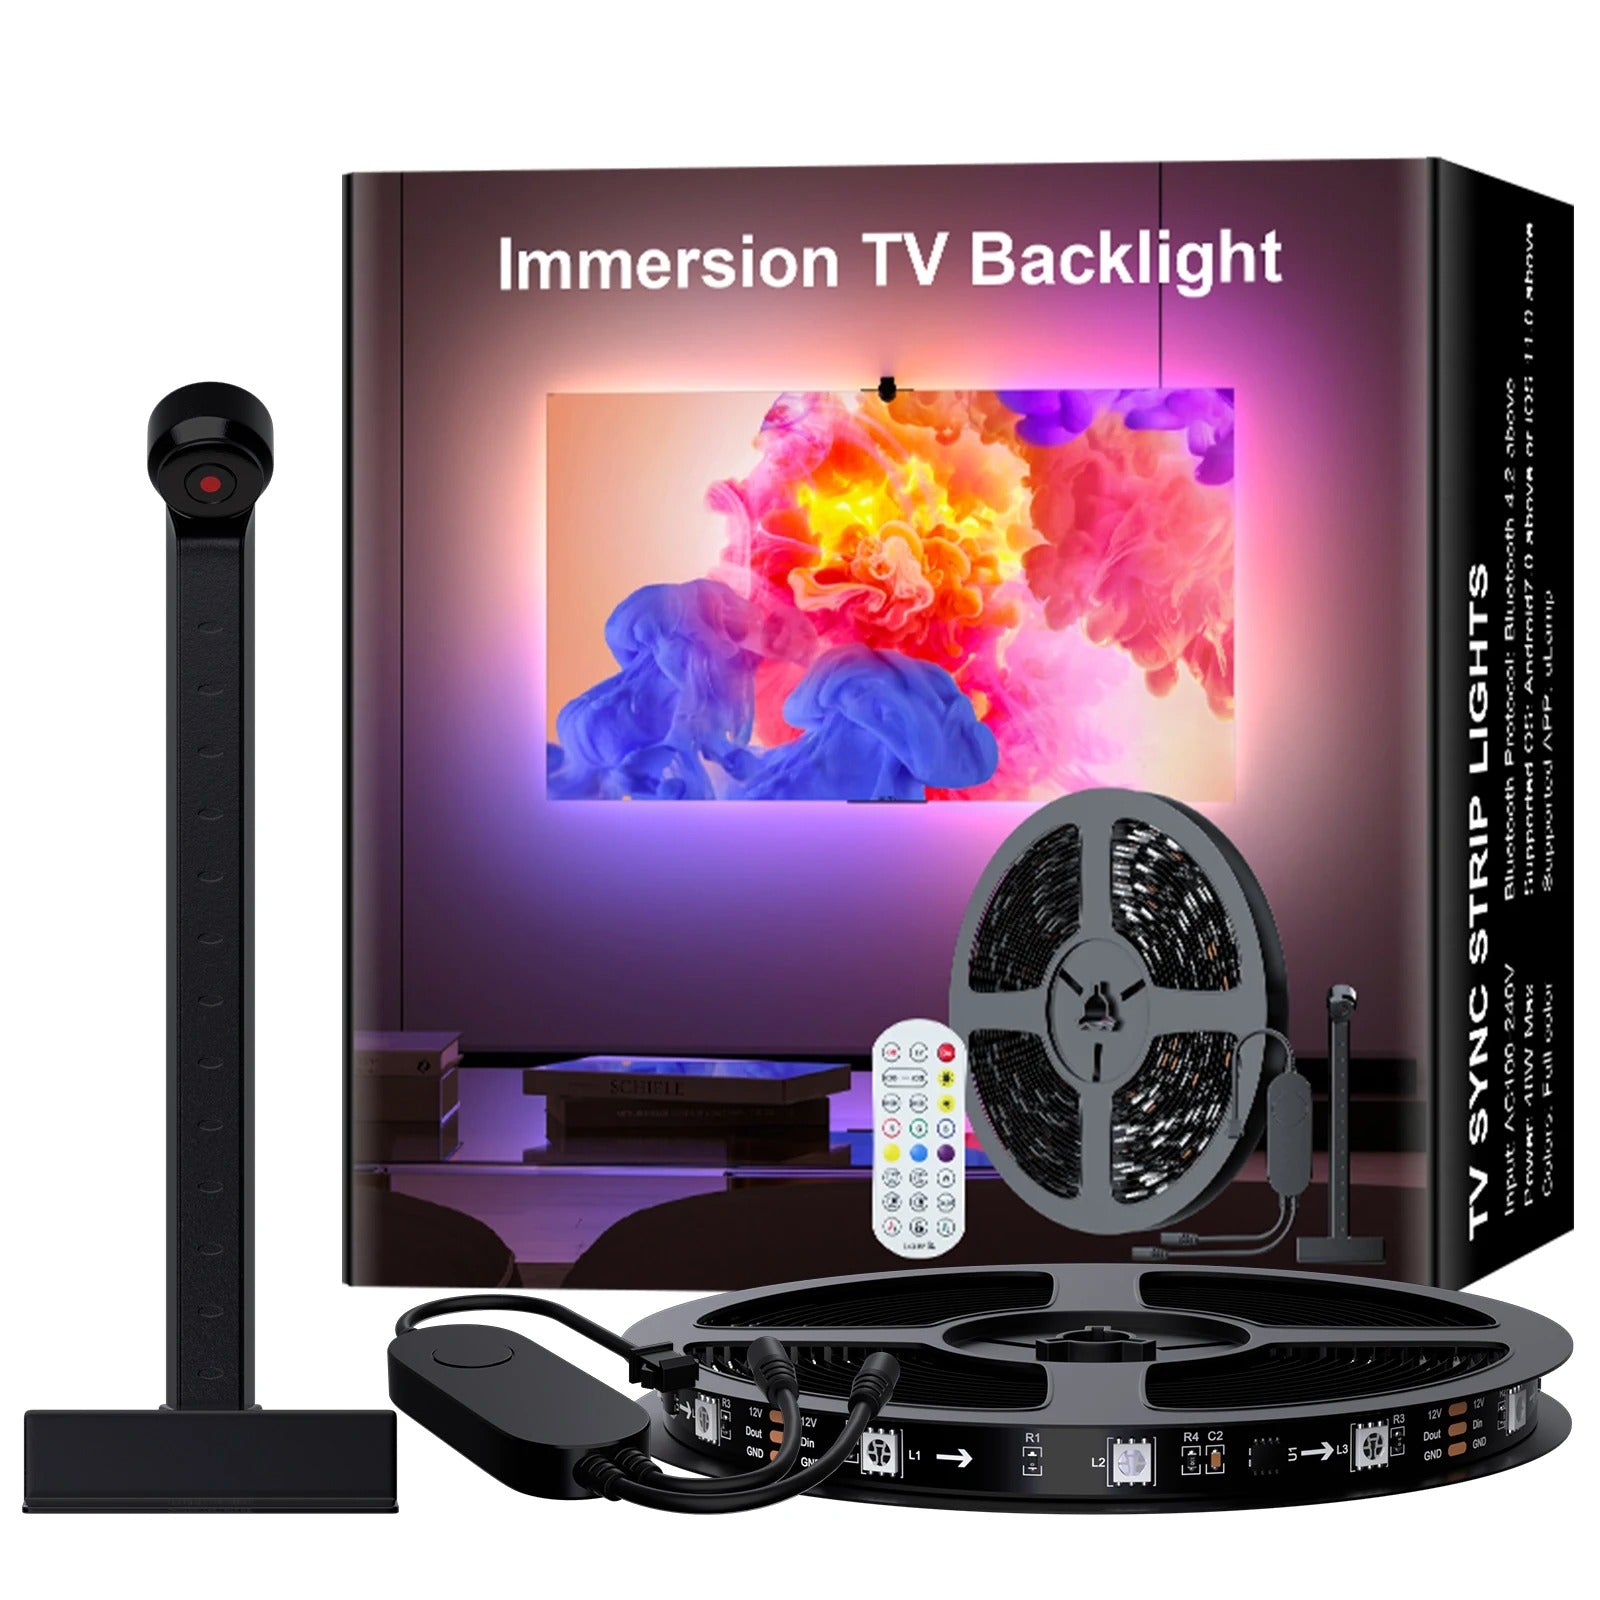 Ergonspace TV Backlights with Camera